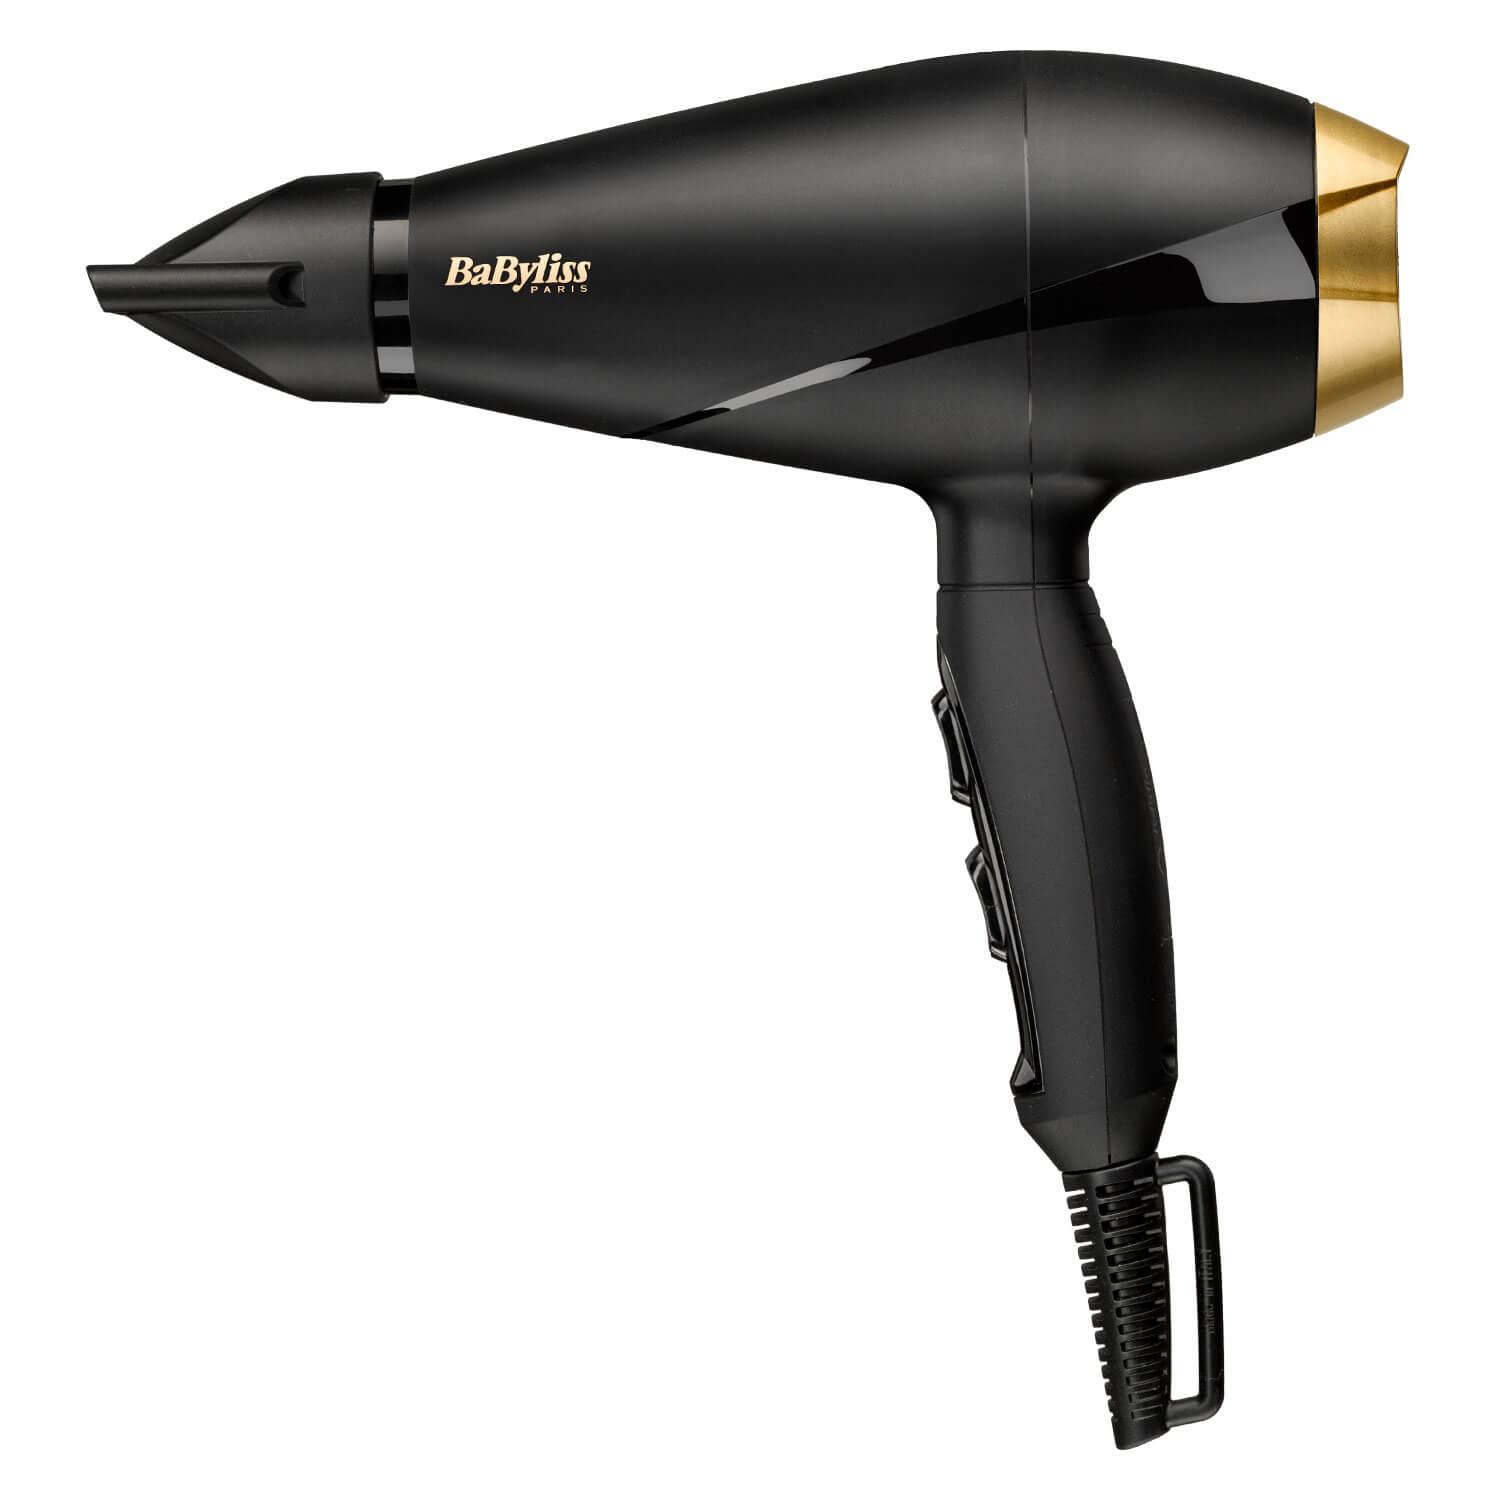 BaByliss - Hairdryer Power Pro 2000W 6704CHE